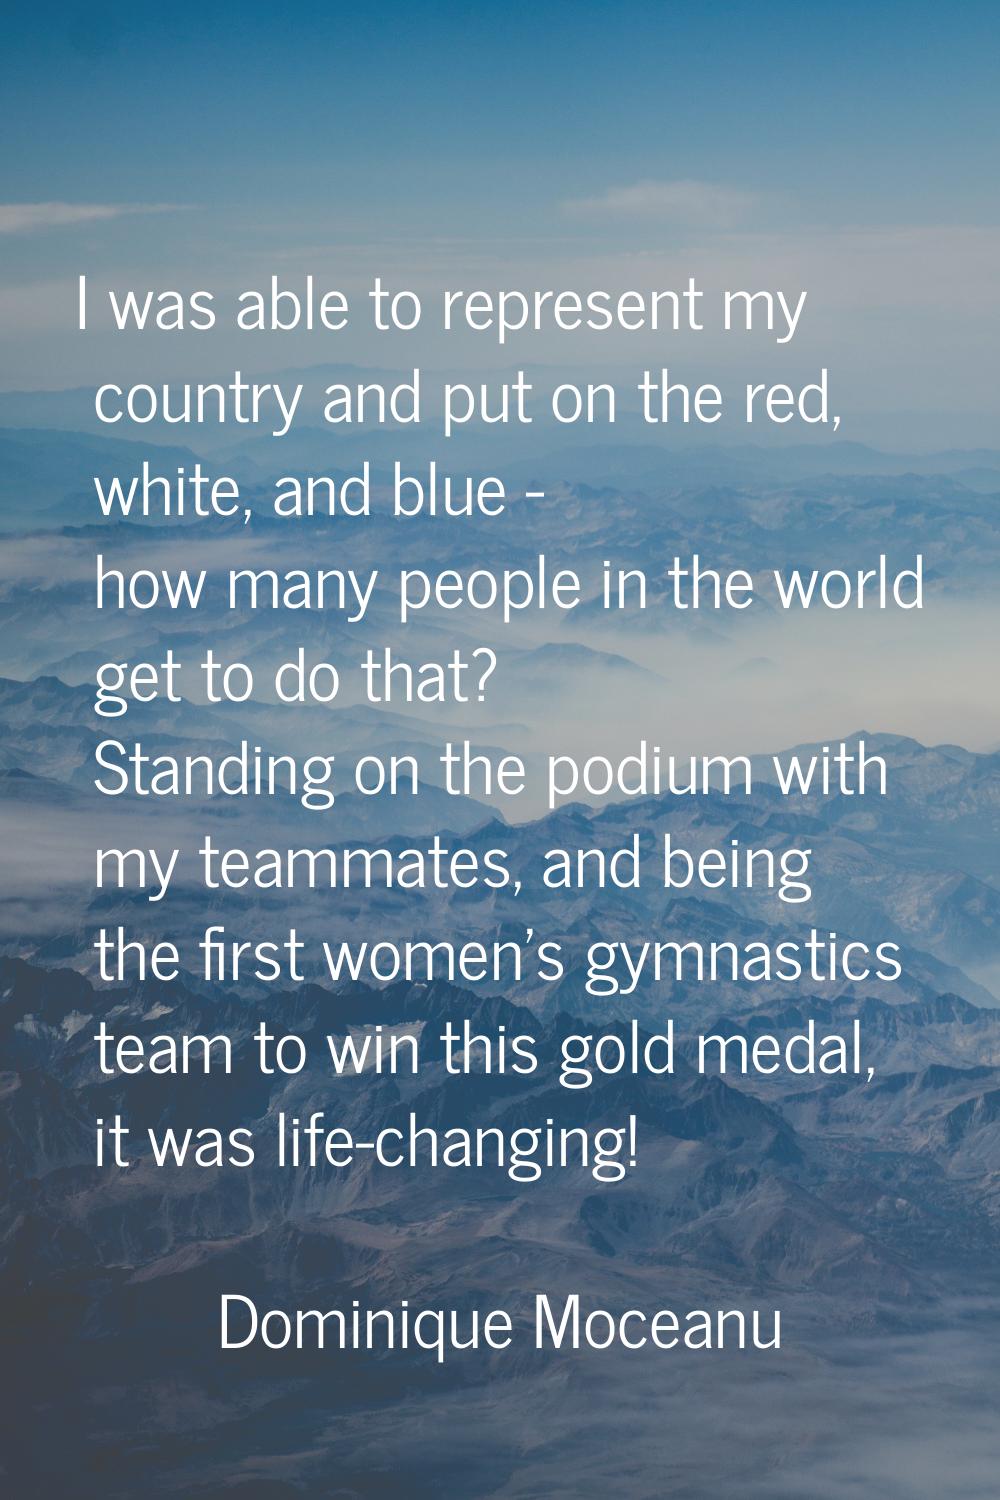 I was able to represent my country and put on the red, white, and blue - how many people in the wor